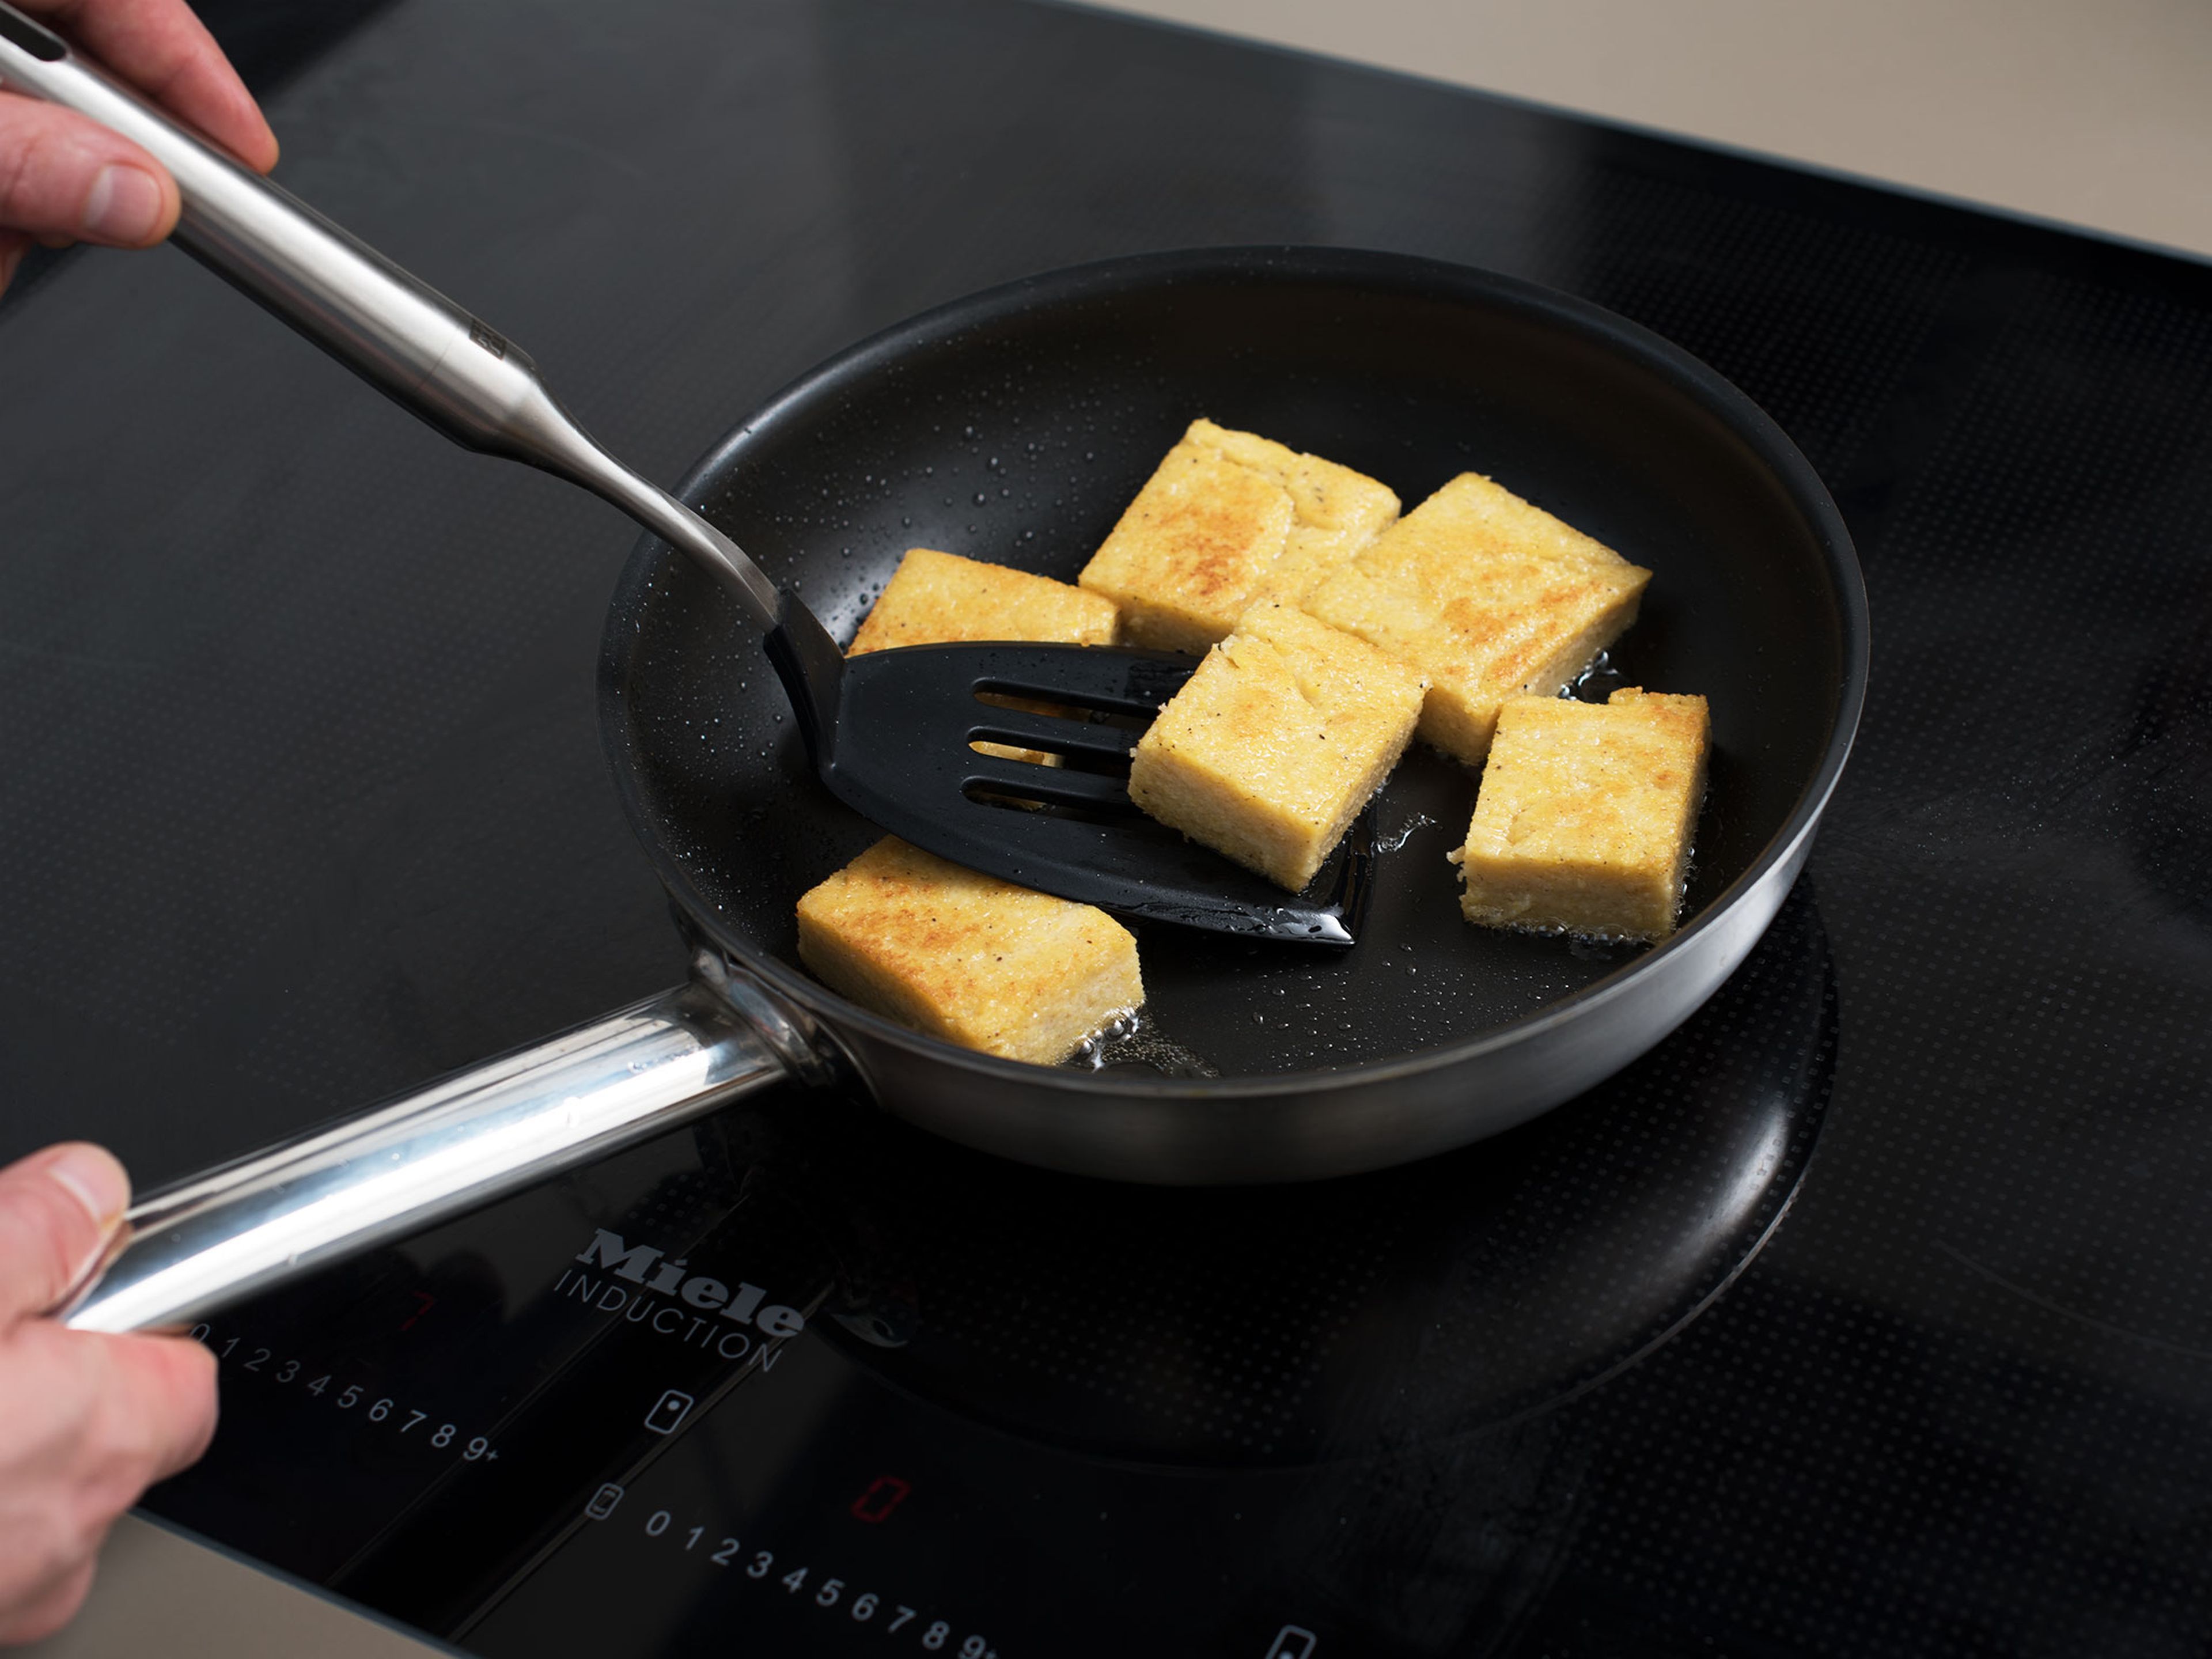 Remove polenta from the fridge. Cut off the edges, then cut polenta into 3x4-cm/ 1x1.5-in. pieces.
Heat oil in a frying pan and fry polenta for approx. 2 min., or until golden brown on both sides.